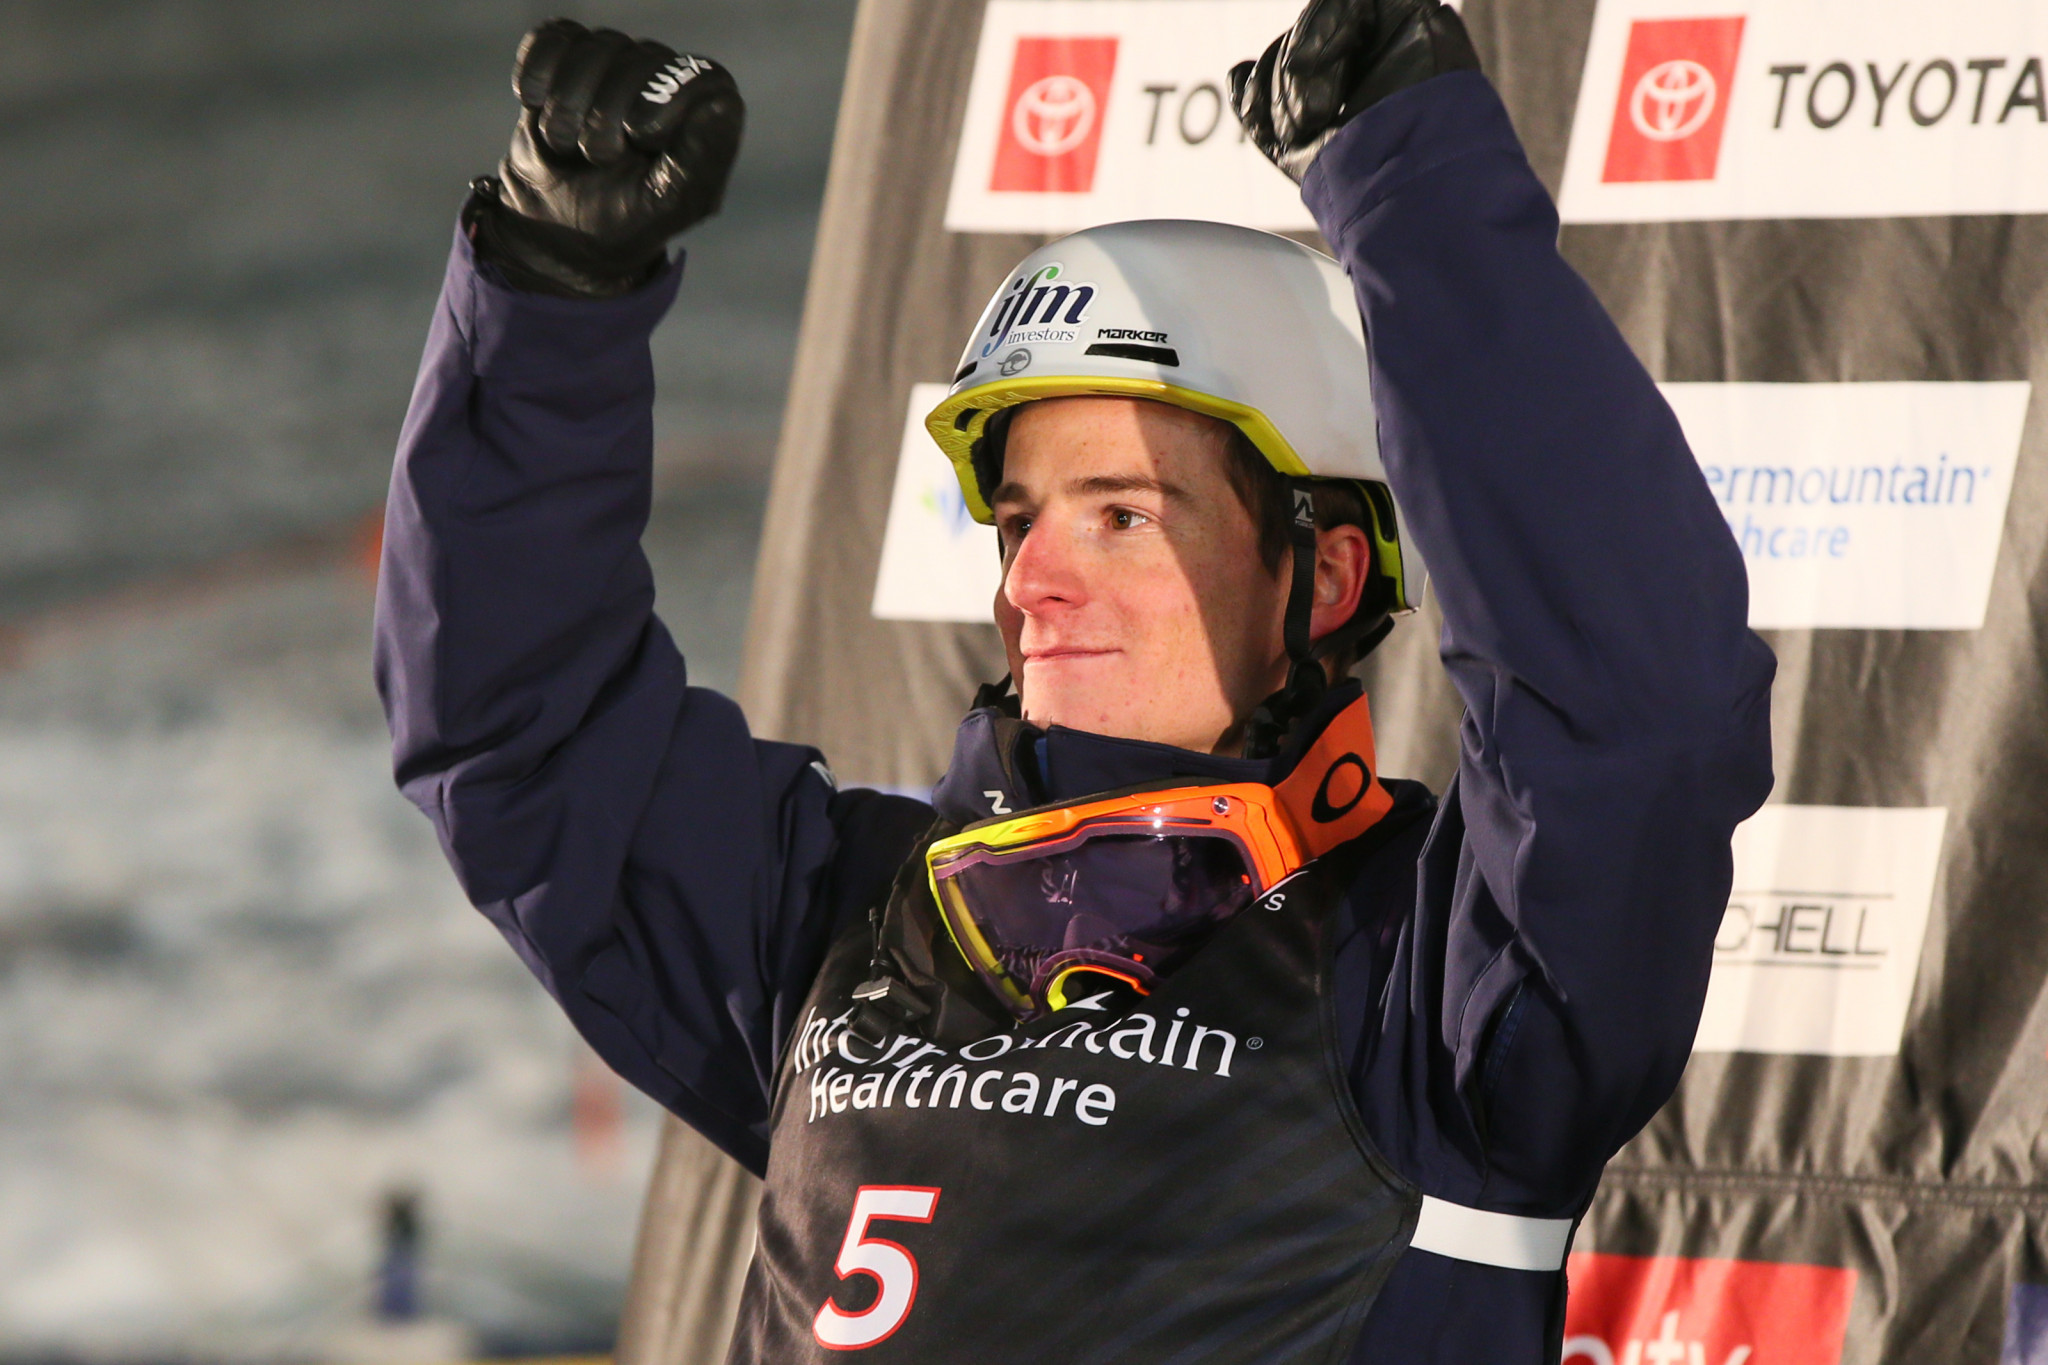 Graham wins crystal globe after cancellation of final FIS Moguls World Cup event